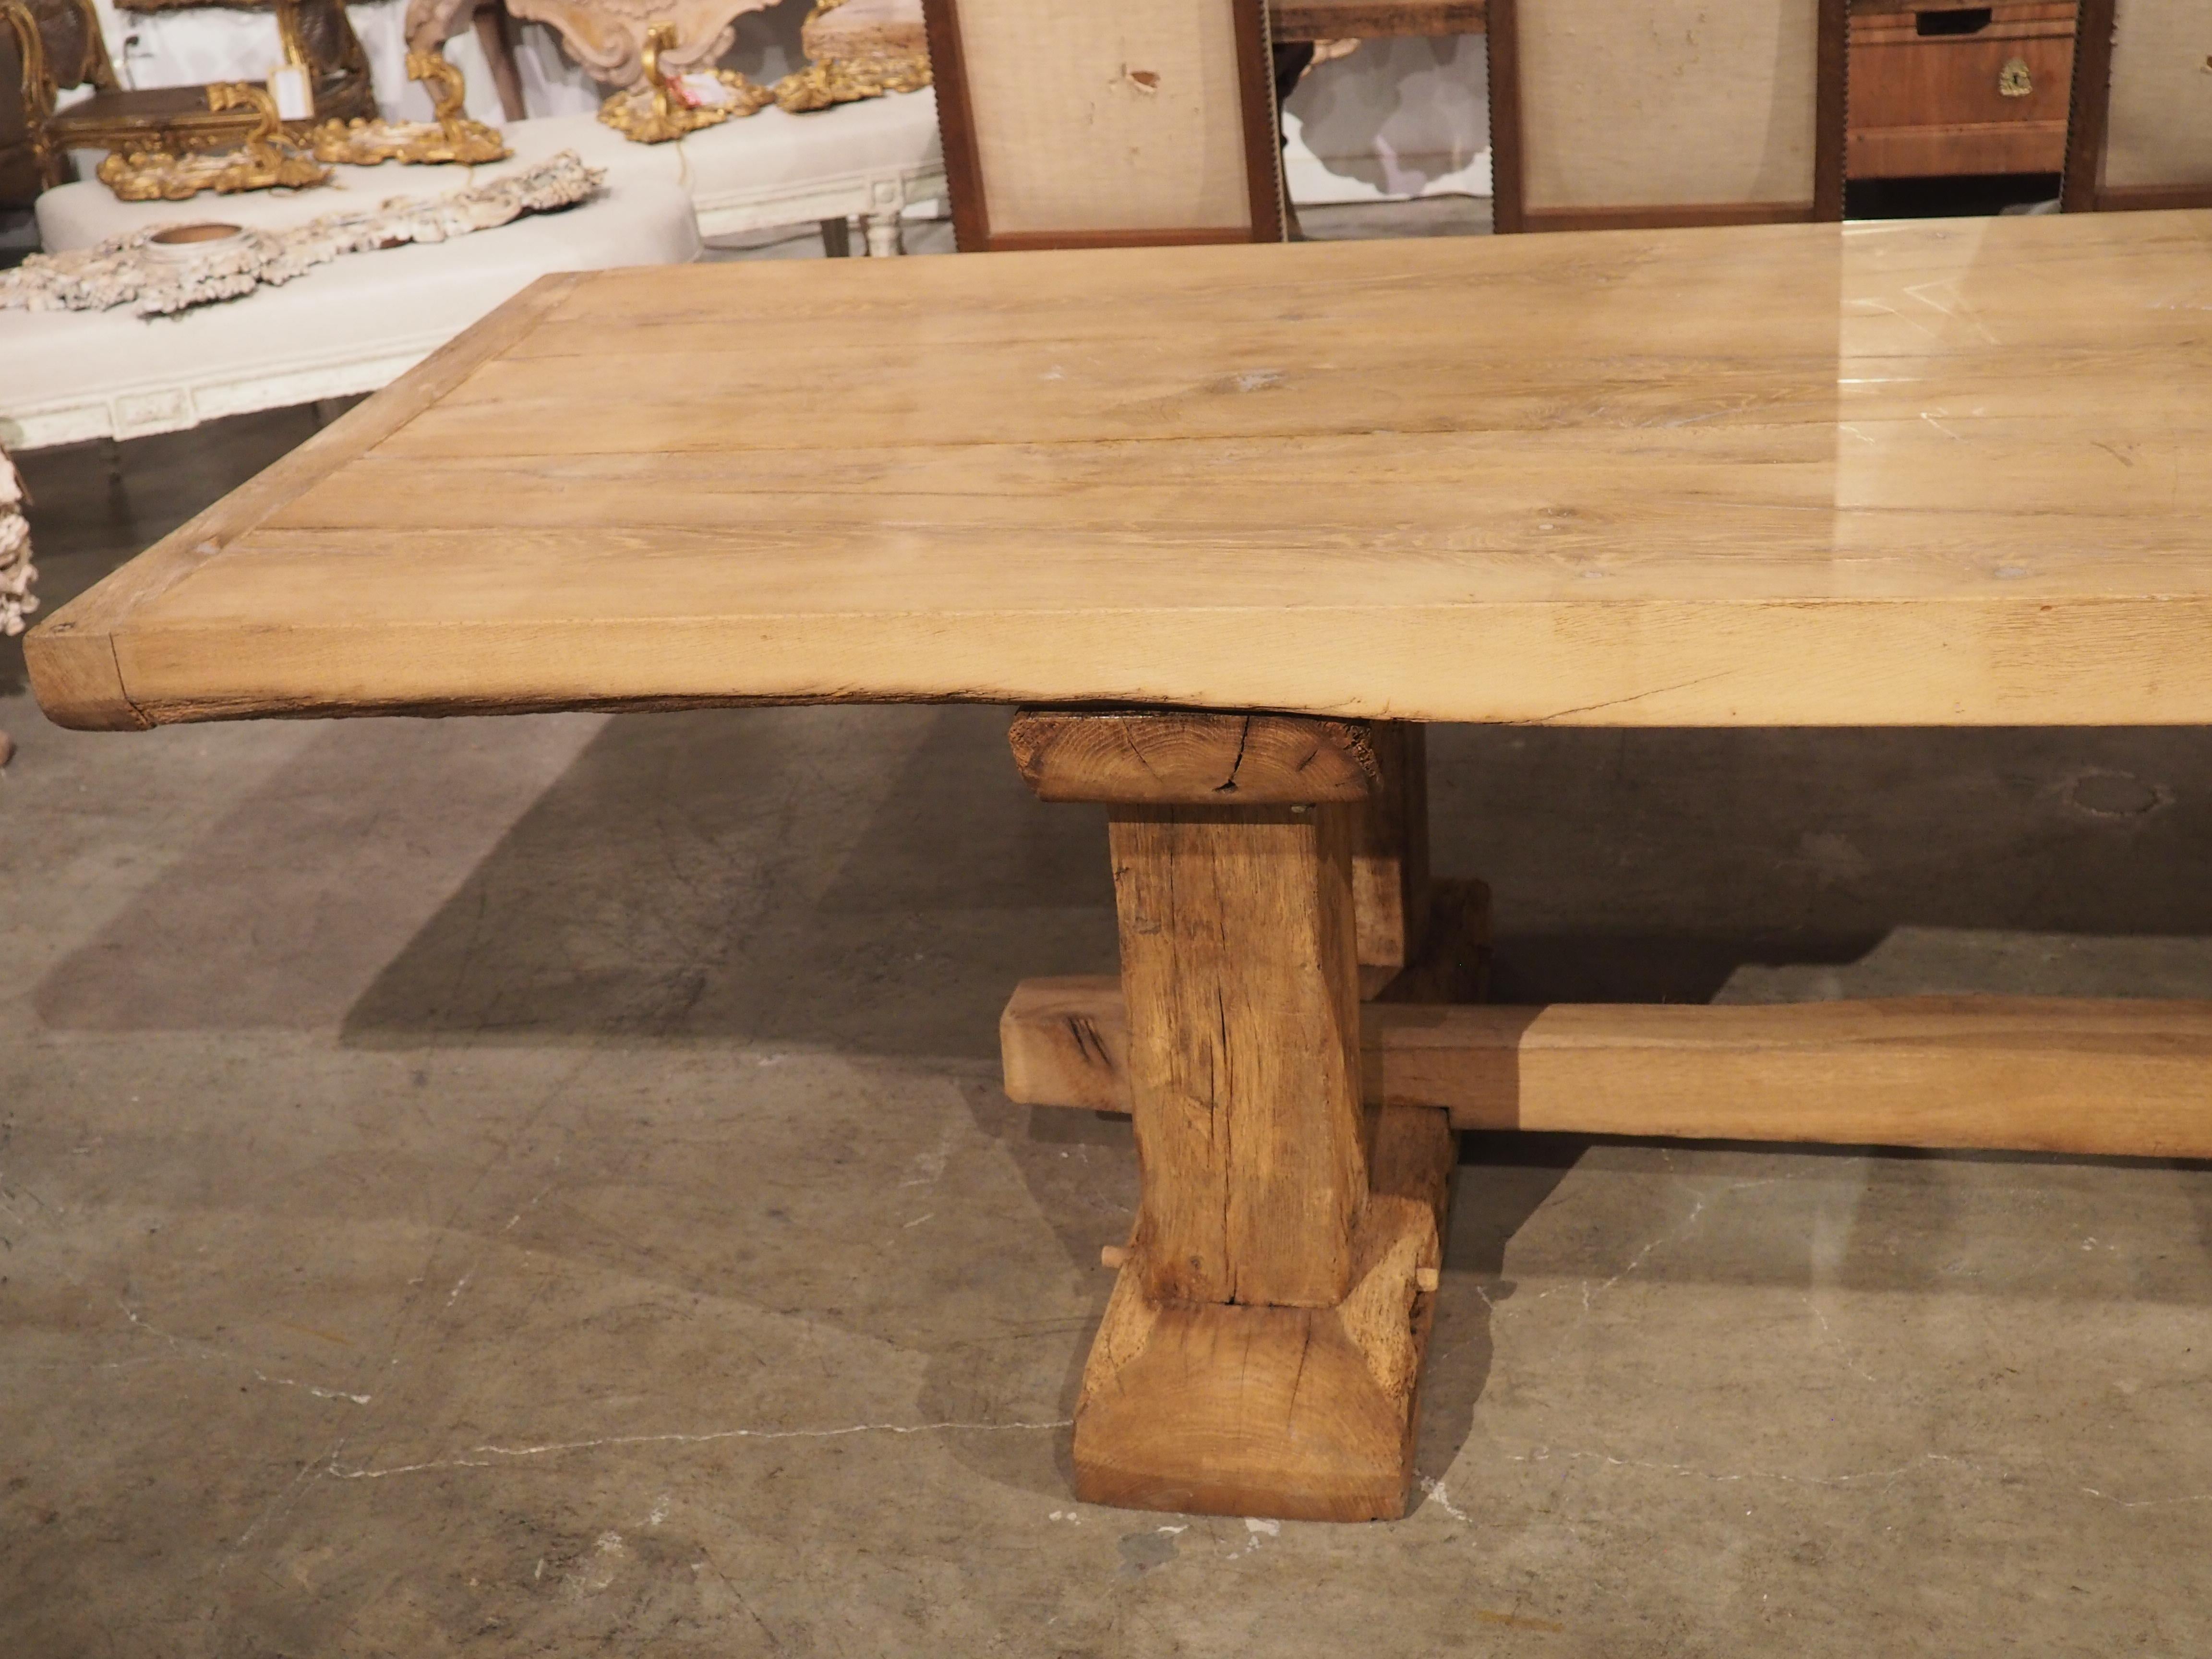 20th Century Monumental Bleached Oak Dining Table from France, Early to Mid 1900s